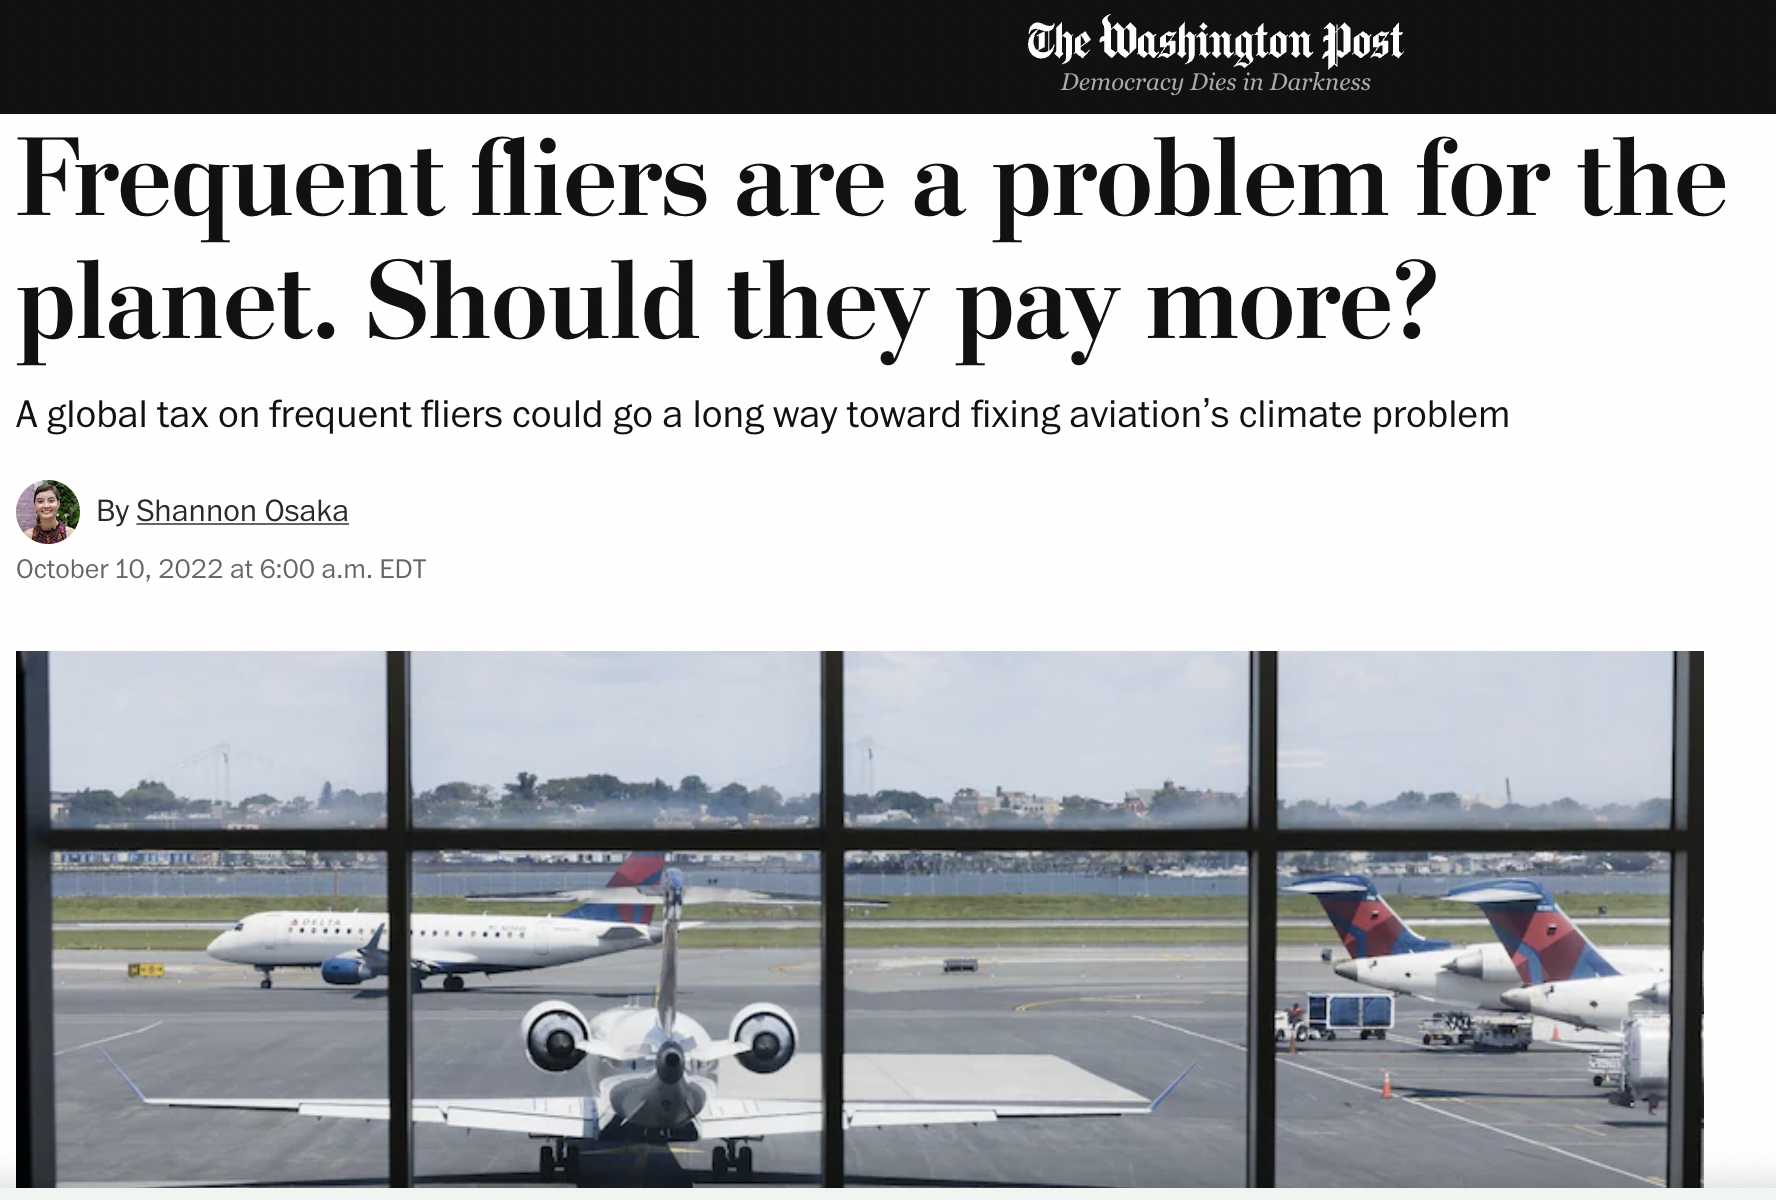 WaPo touts report calling for ‘global tax’ on commercial flying (but not private jets) – ‘Would require’ global ‘centralized system to track passports’